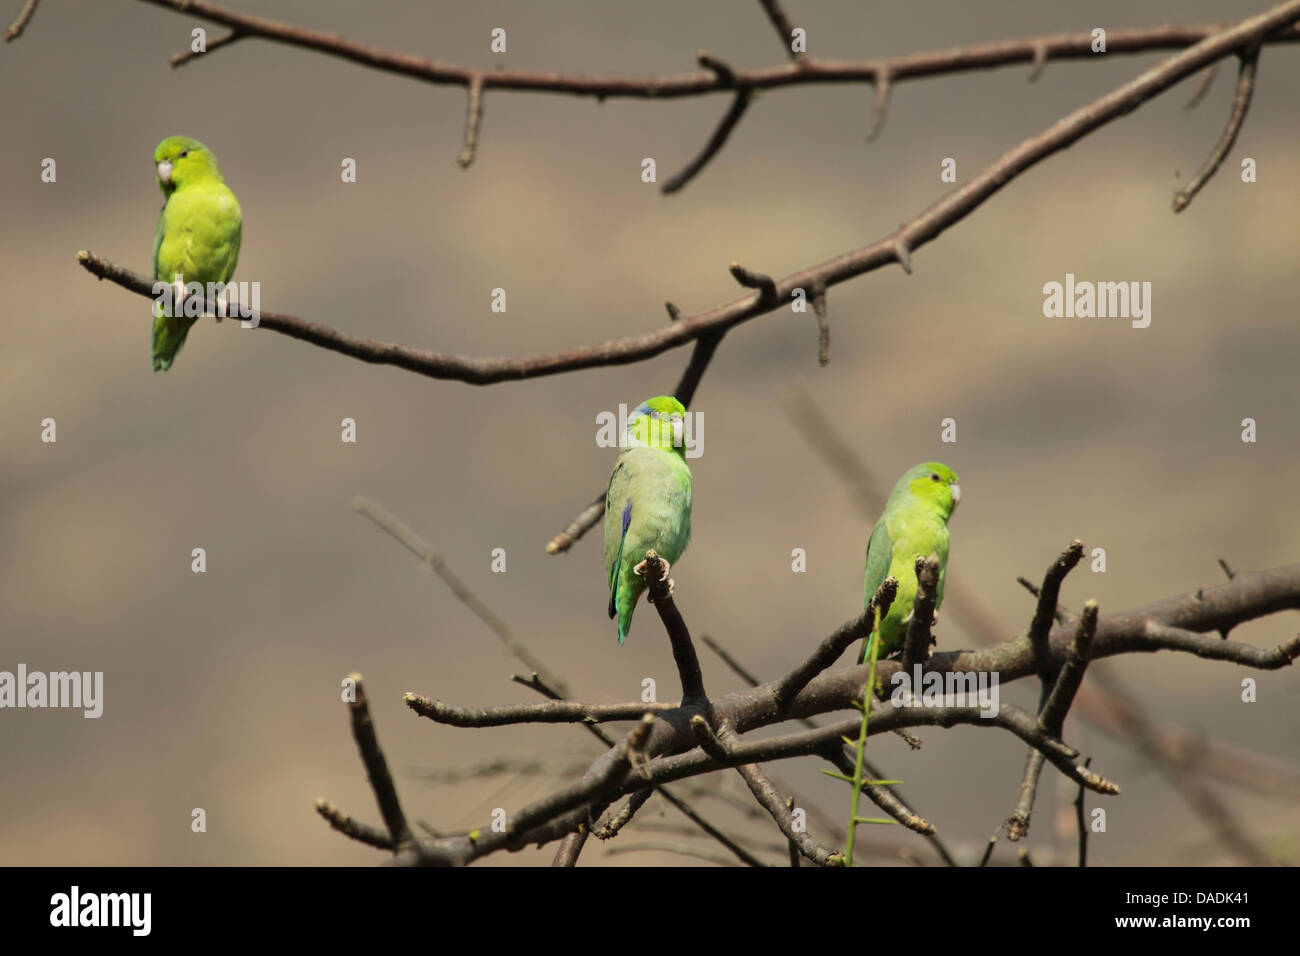 Pacific parrotlet (Forpus coelestis), three parrots in tree without leaves, Peru, Lambayeque, Reserva Chaparri Stock Photo